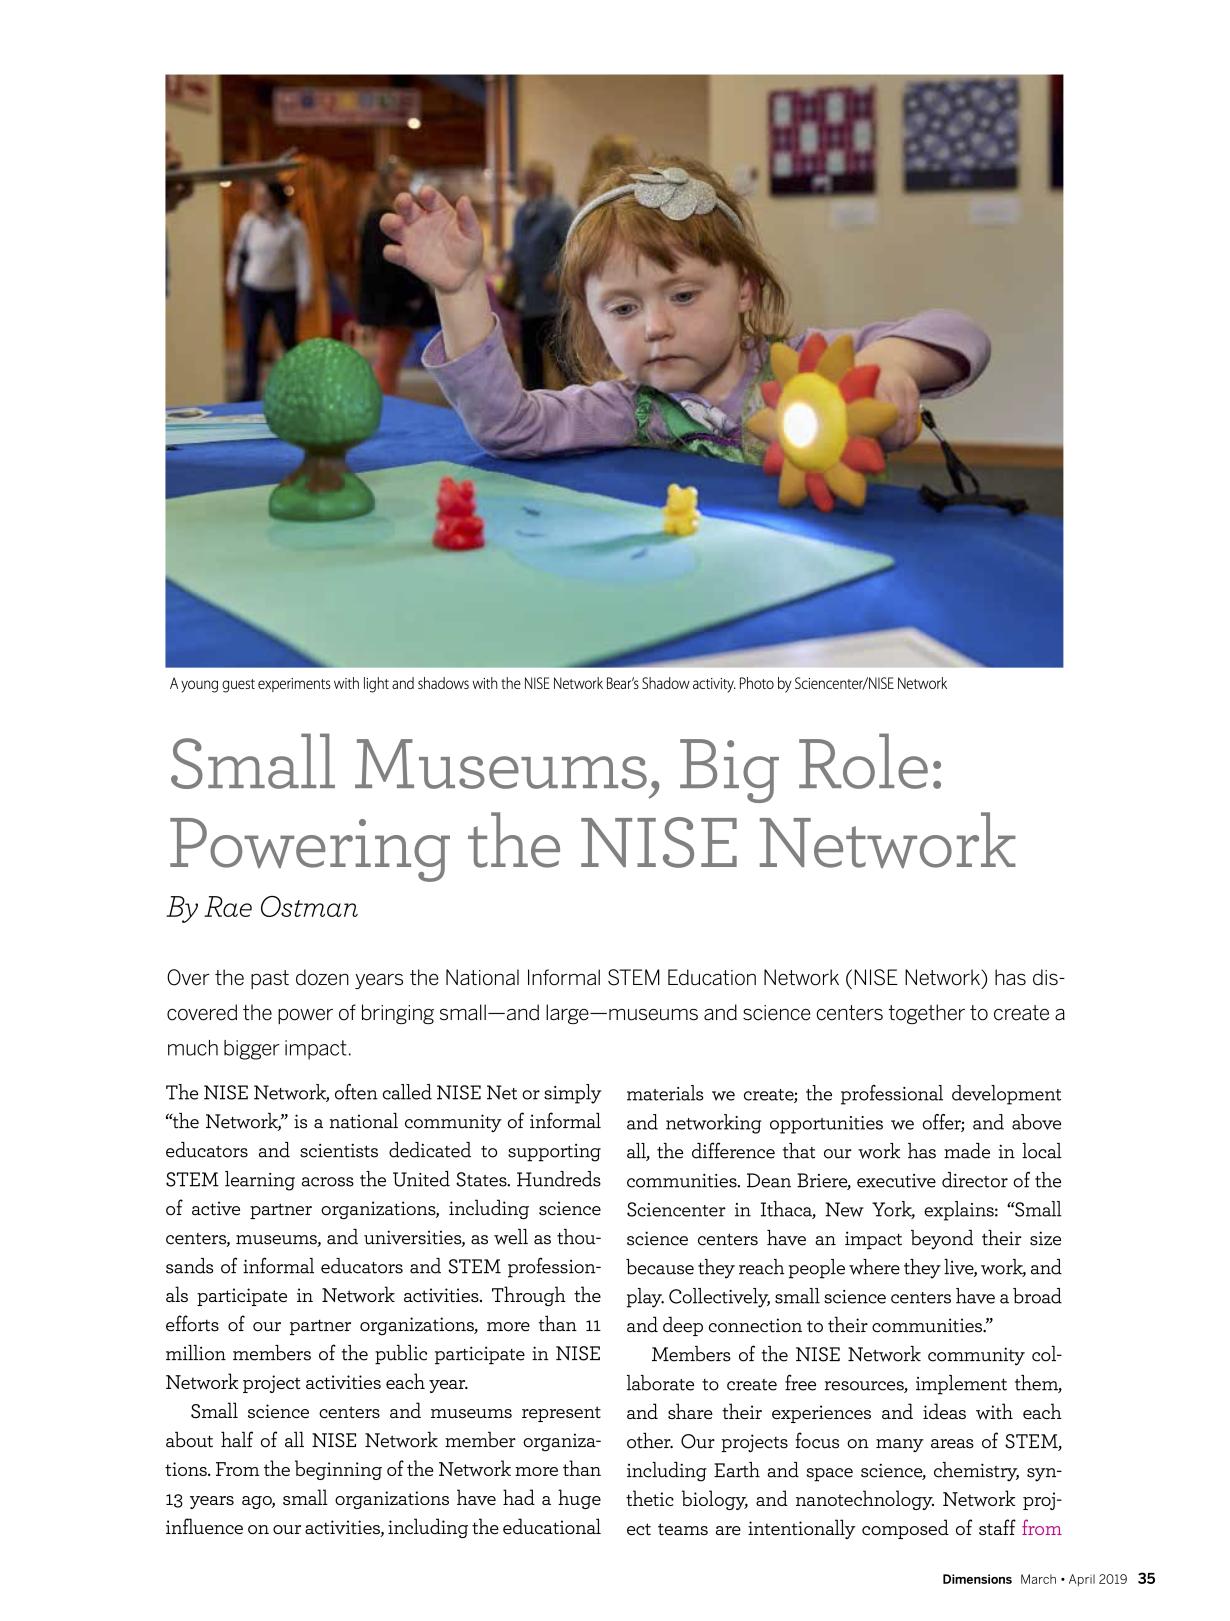 Ostman 2019 Small Museums Big Role publication cover page